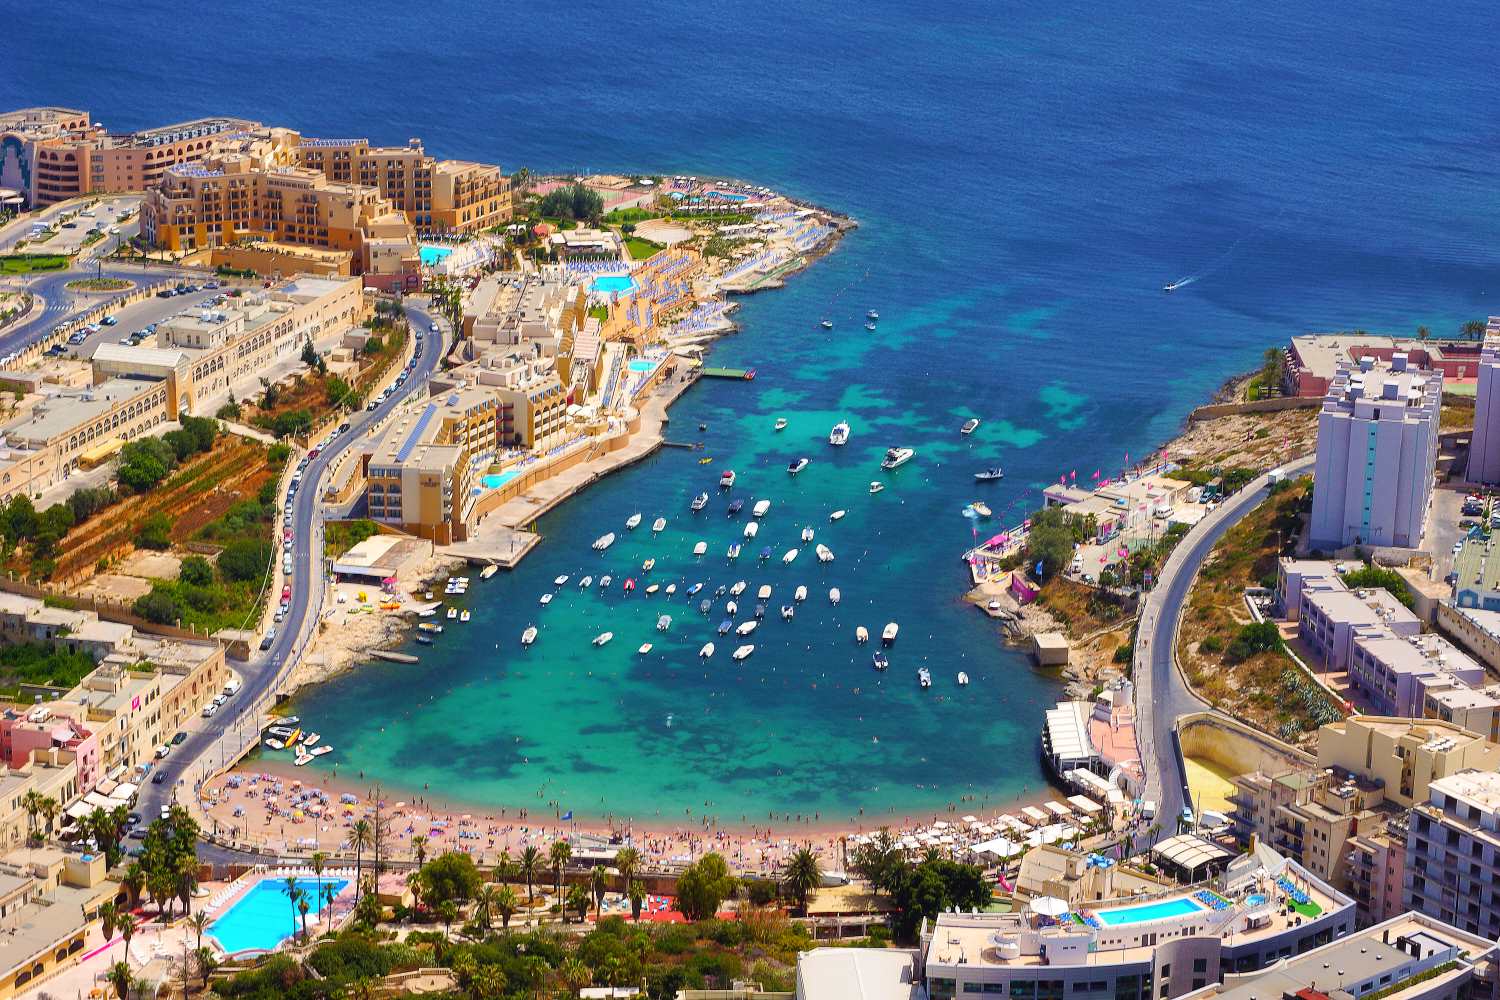 Travel with us to Malta and discover incredible views and crystal blue waters